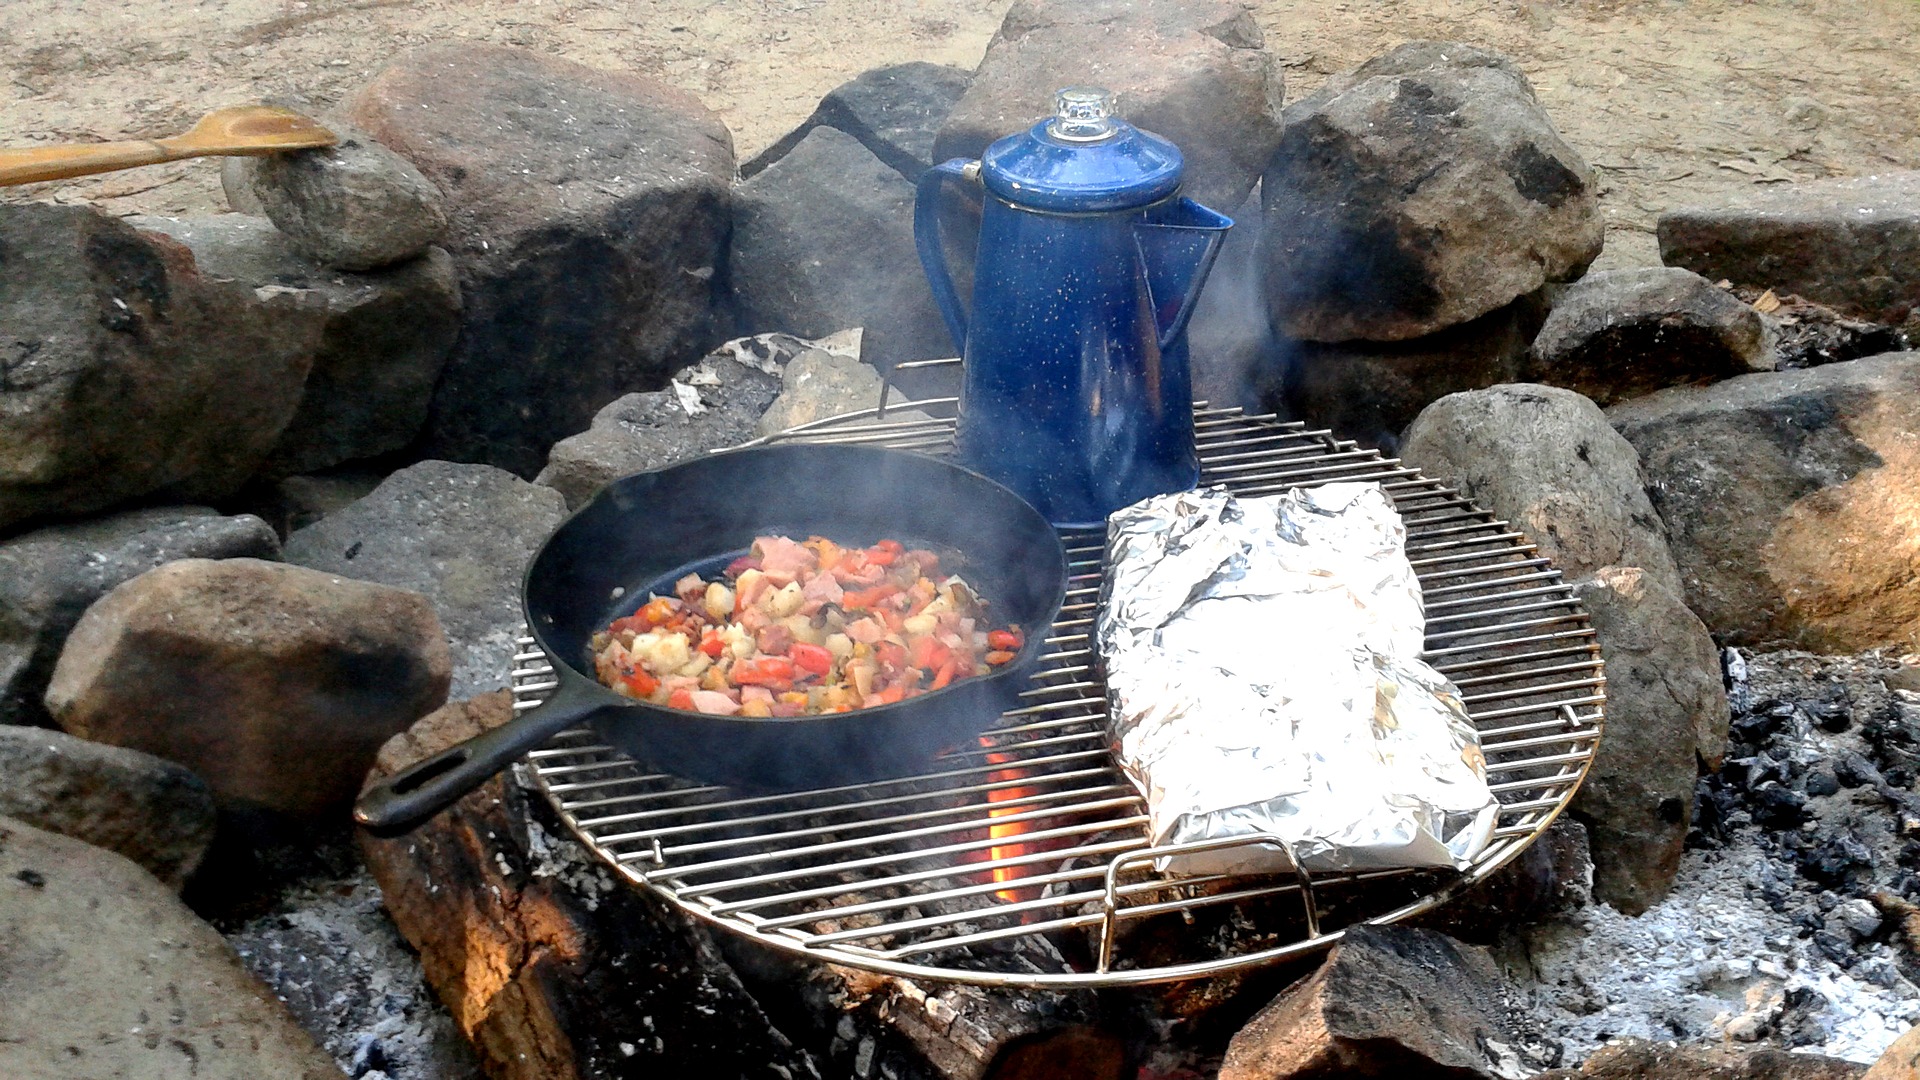 If you have a cast iron skillet and a small coffee percolator, the possibilities for camping breakfasts are endless.